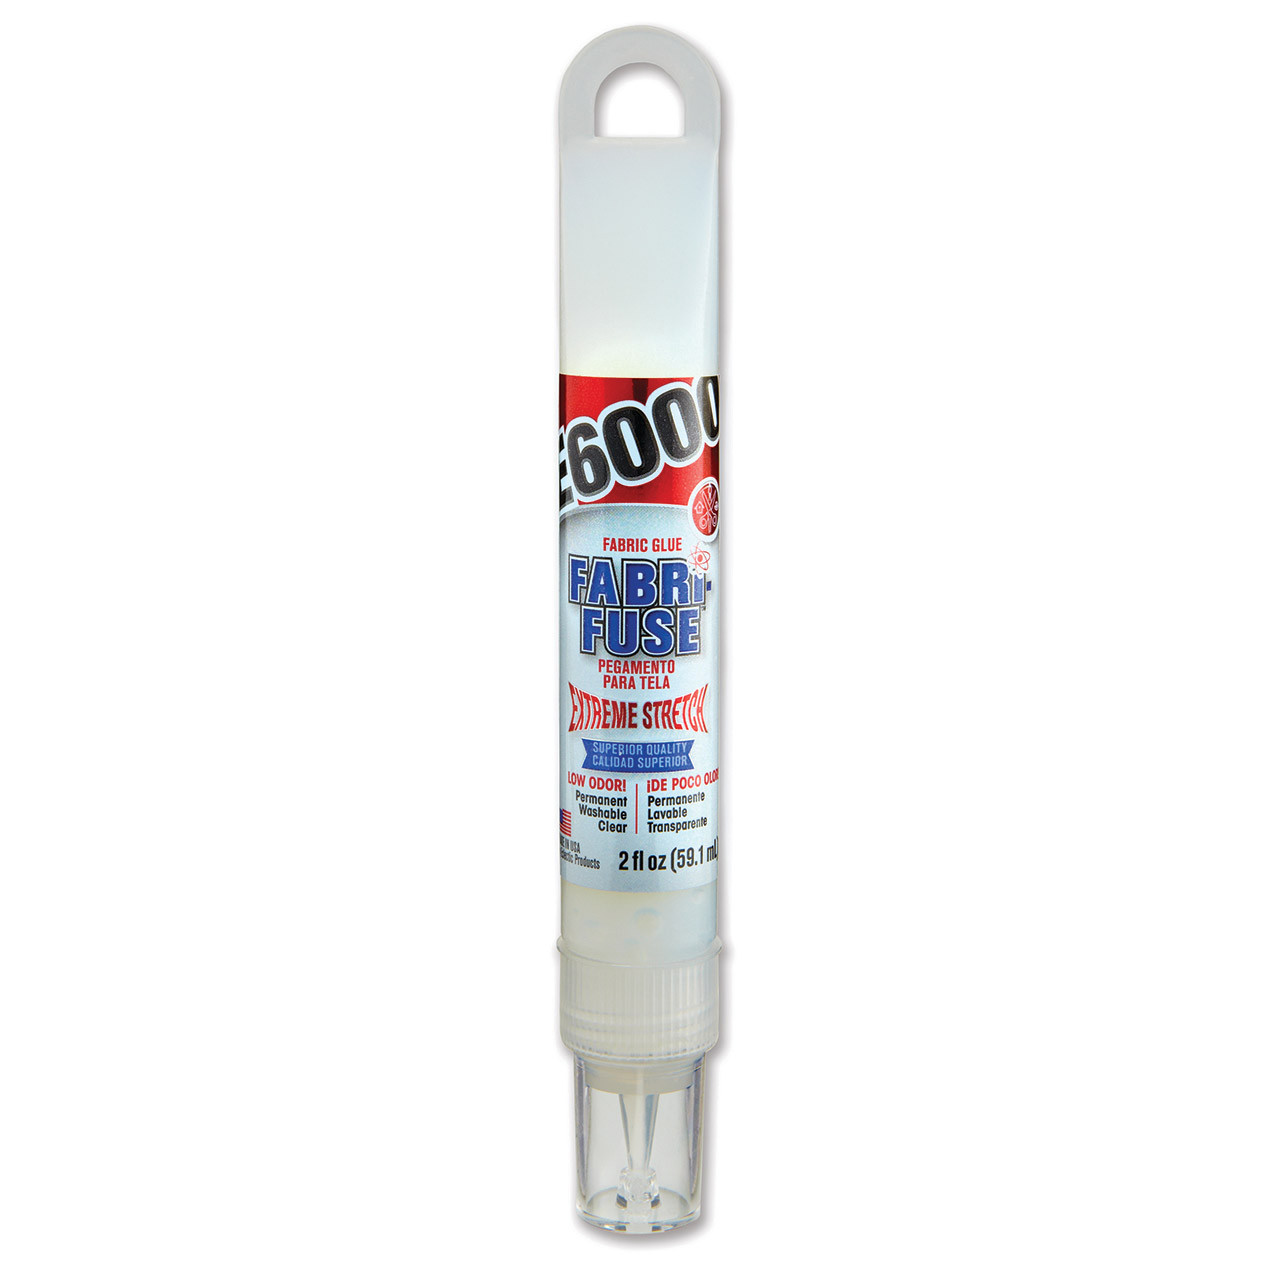 NEW from E6000 Glue Adhesives! - Rhinestones Unlimited